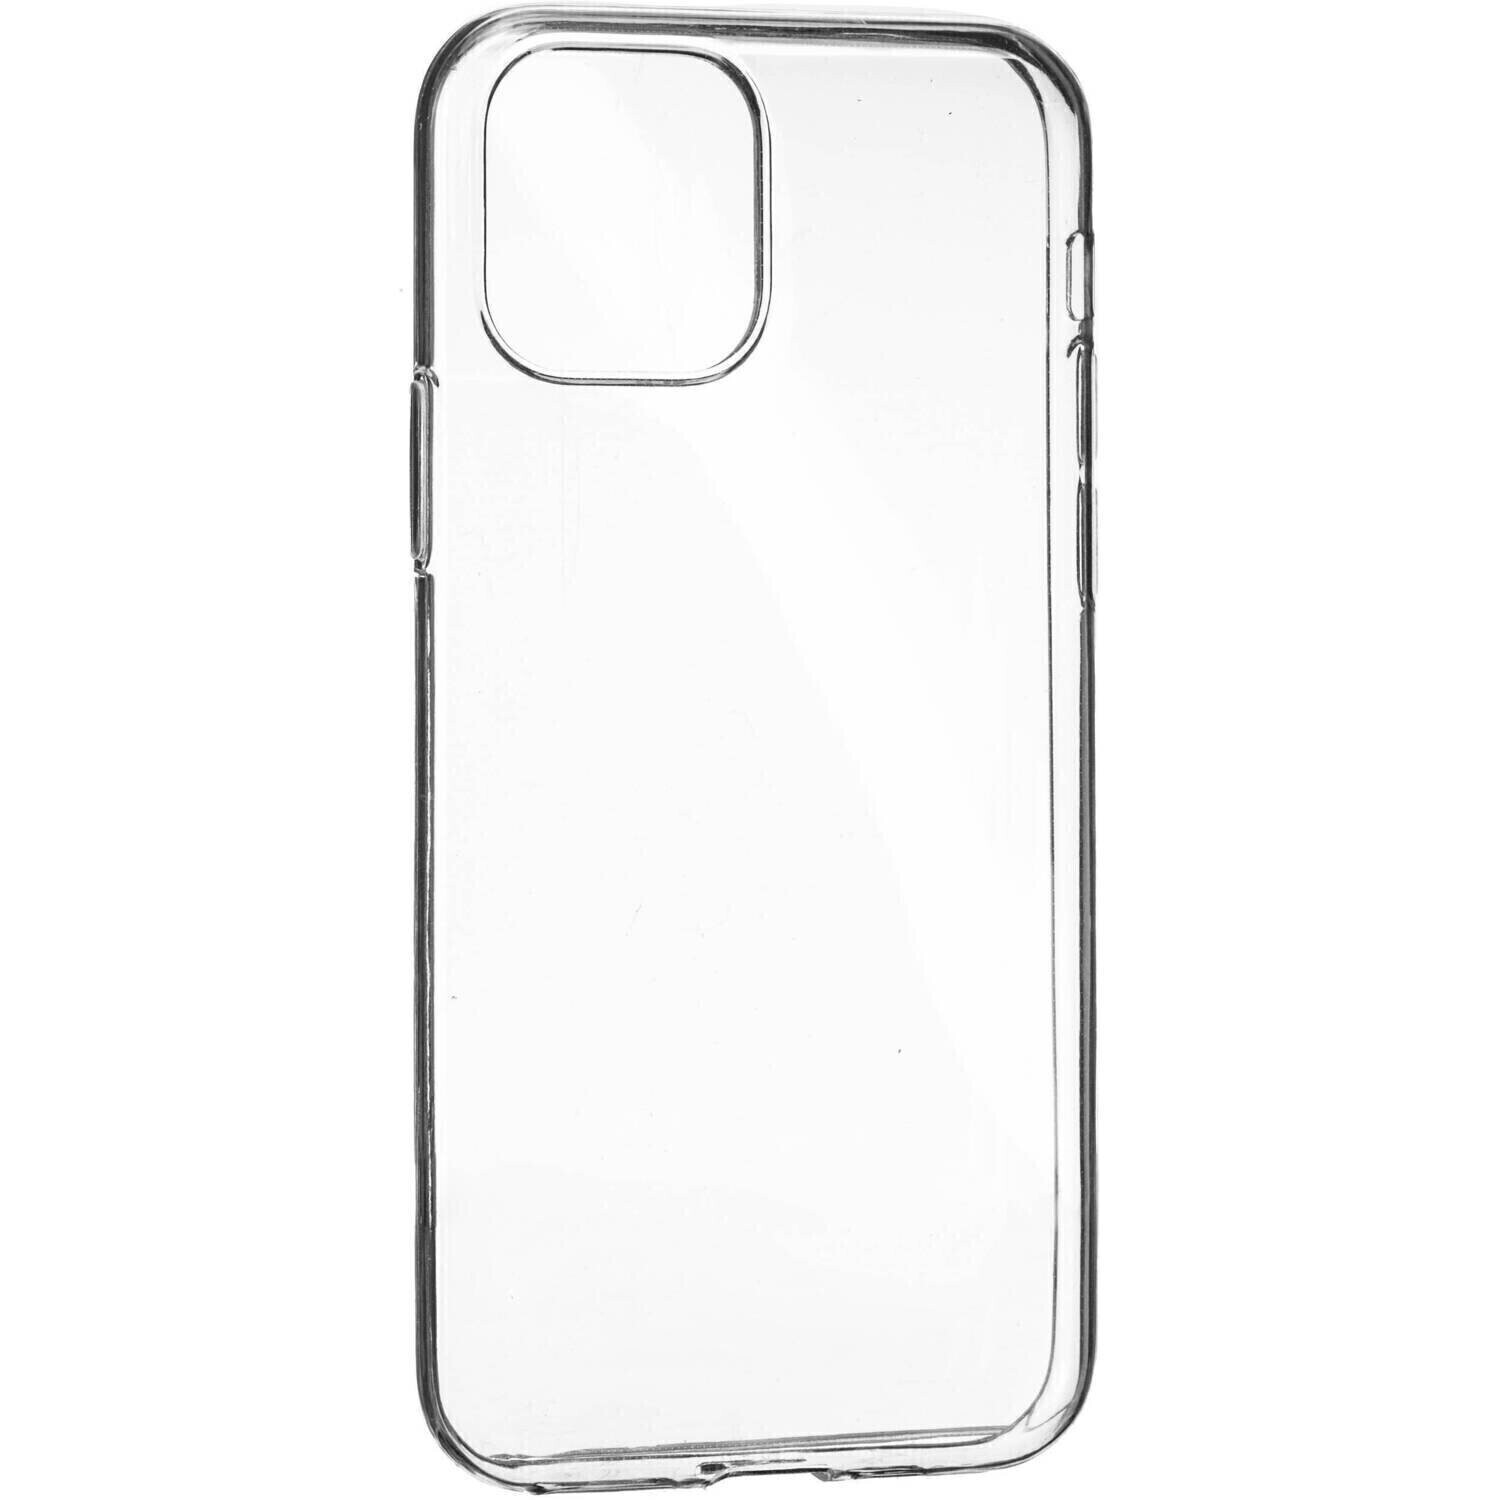 Komass iPhone 11 Soft Case, Clear (Screen Protector)